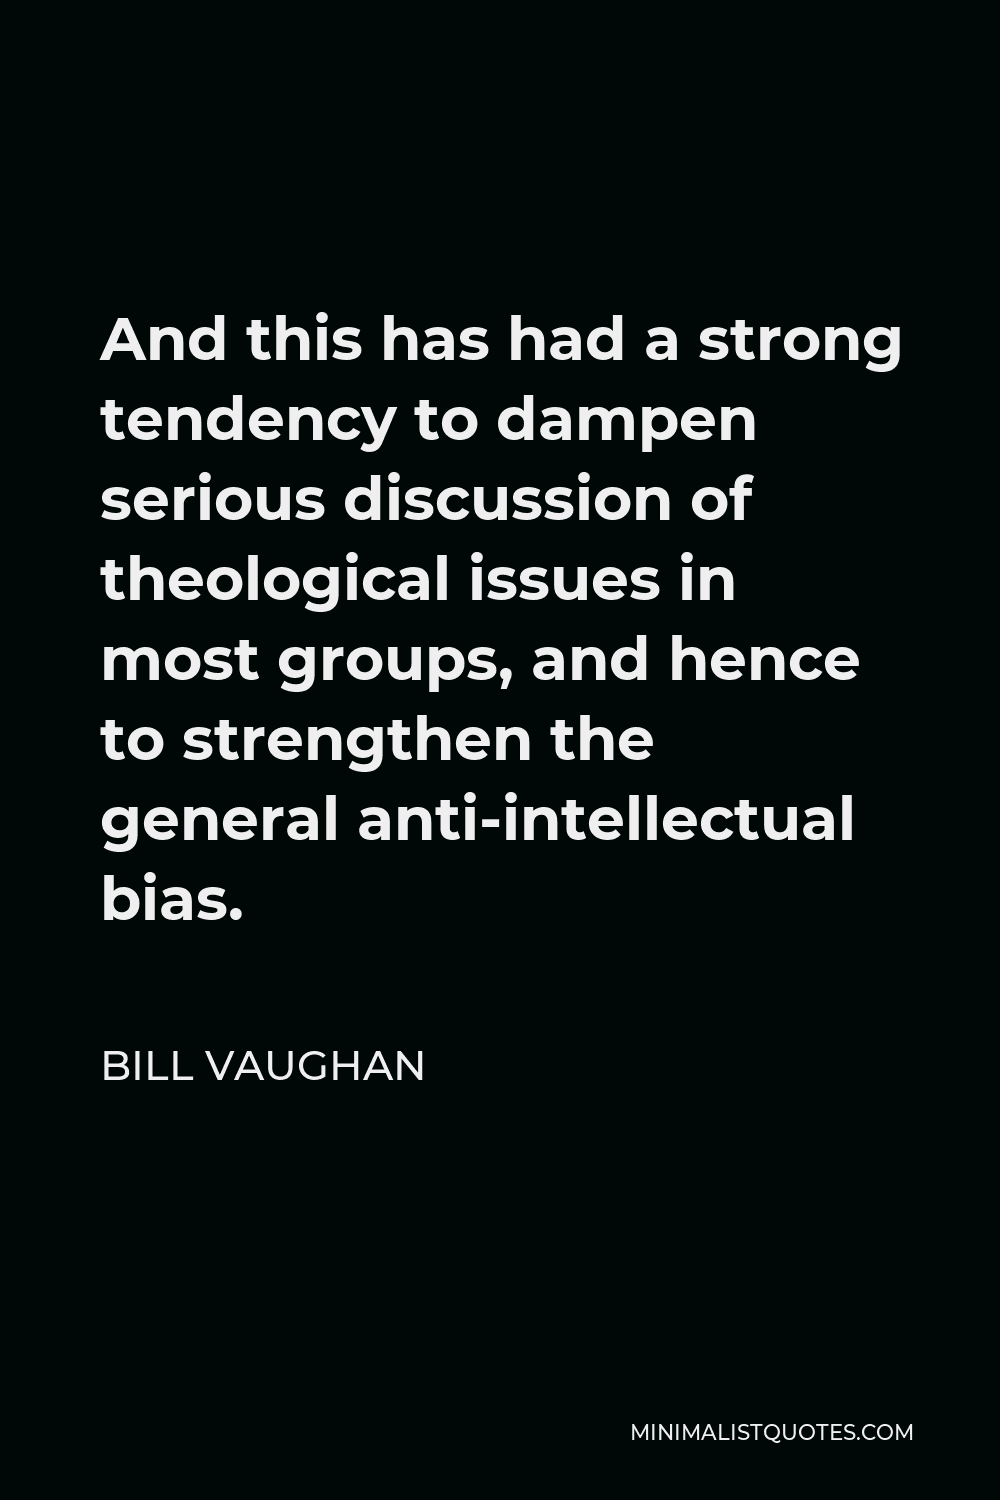 Bill Vaughan Quote - And this has had a strong tendency to dampen serious discussion of theological issues in most groups, and hence to strengthen the general anti-intellectual bias.